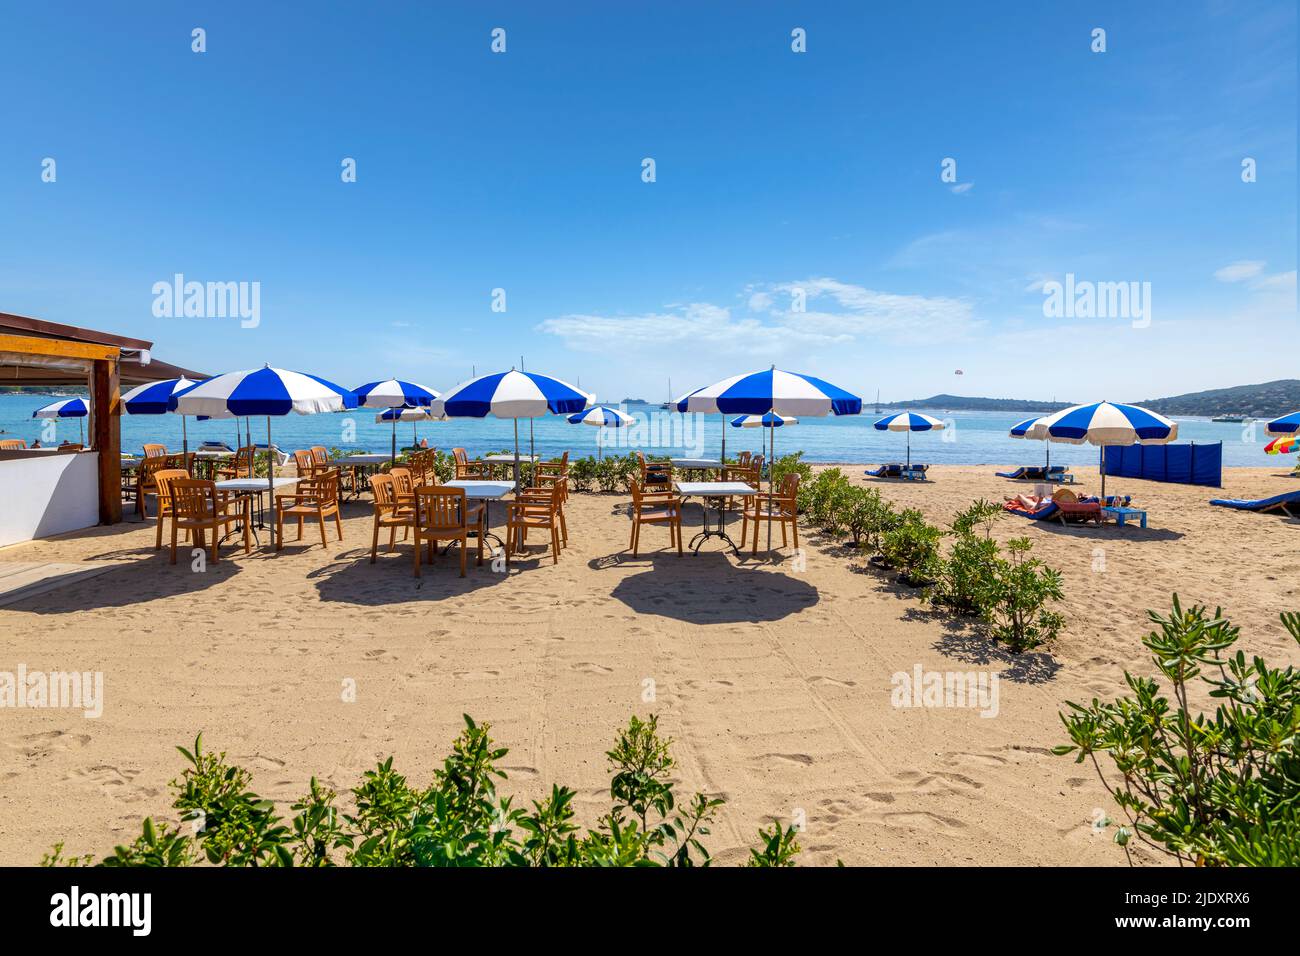 Chairs, lounges and umbrellas along the French Riviera at the sandy beach of Port Grimaud, France, near Saint-Tropez along the Mediterranean Sea. Stock Photo